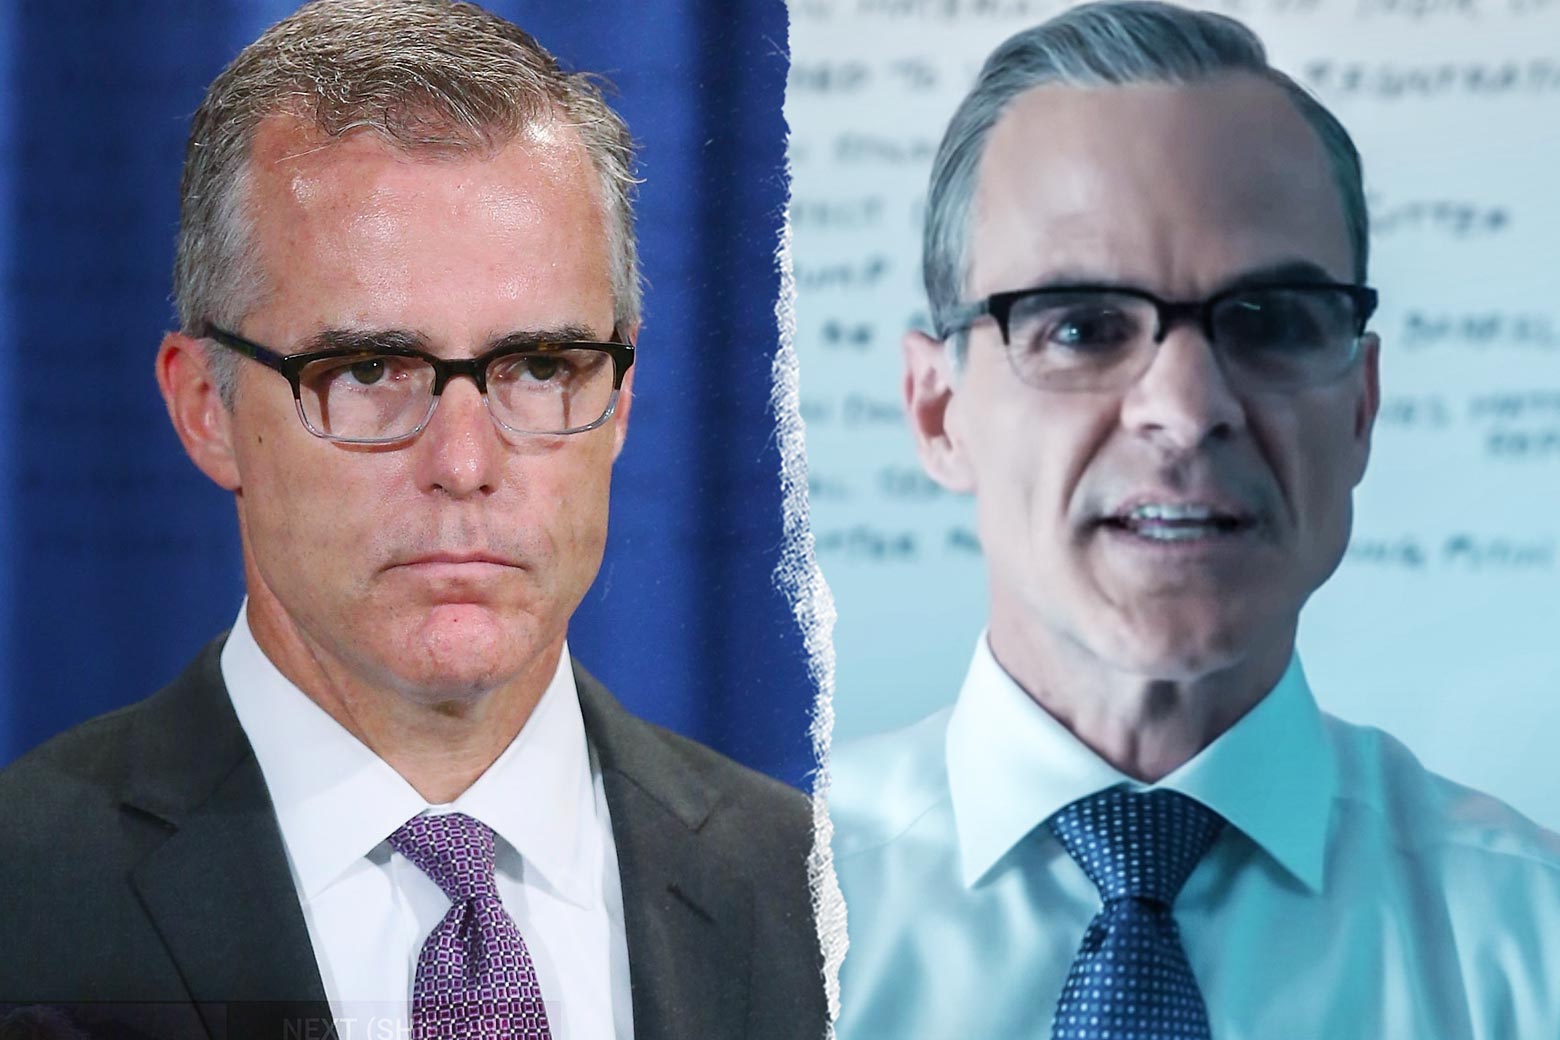 Andrew McCabe, and Michael Kelly as Andrew McCabe in The Comey Rule.